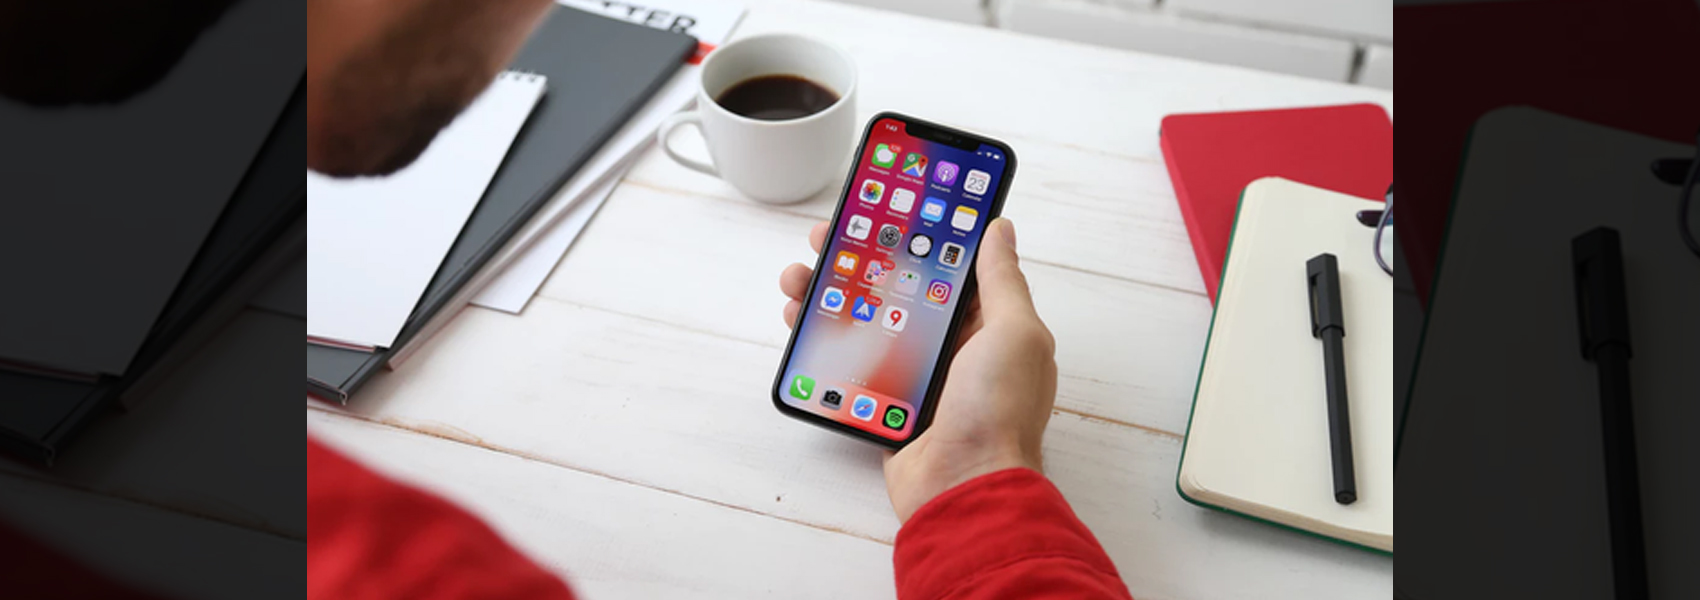 5 Hacks To Make Your Phone A Productivity Tool,5 Hacks To Make Your Phone,Your Phone Productivity Tool,Startup Stories,Latest Technology News 2019,Best Technology Tips 2019,Smartphone Productivity Tips,Best Productivity Tools,Ultimate Productivity Tools for Entrepreneurs